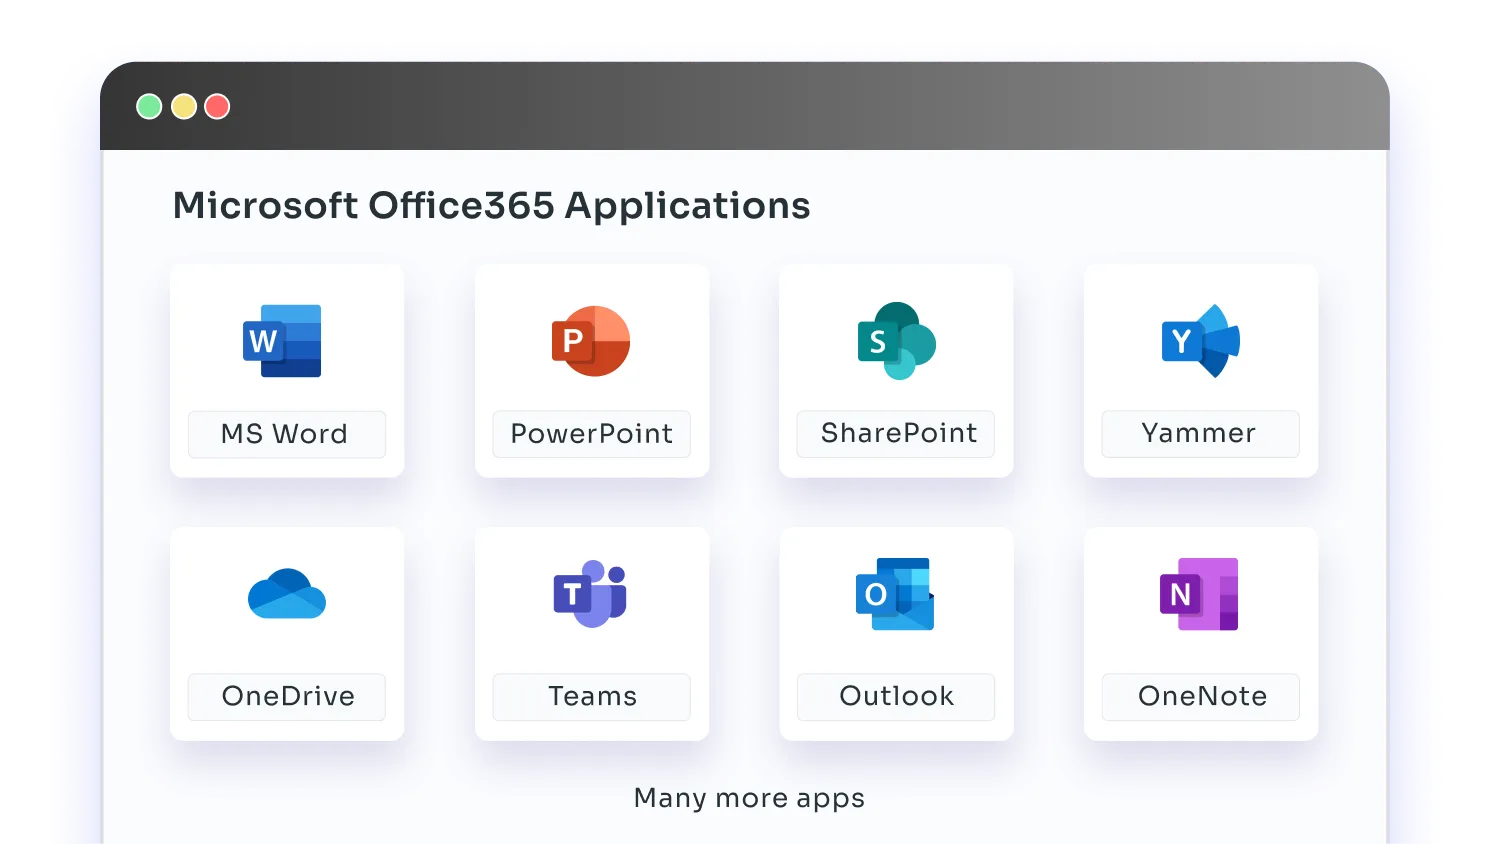 Microsoft Office 365 applications casb solution